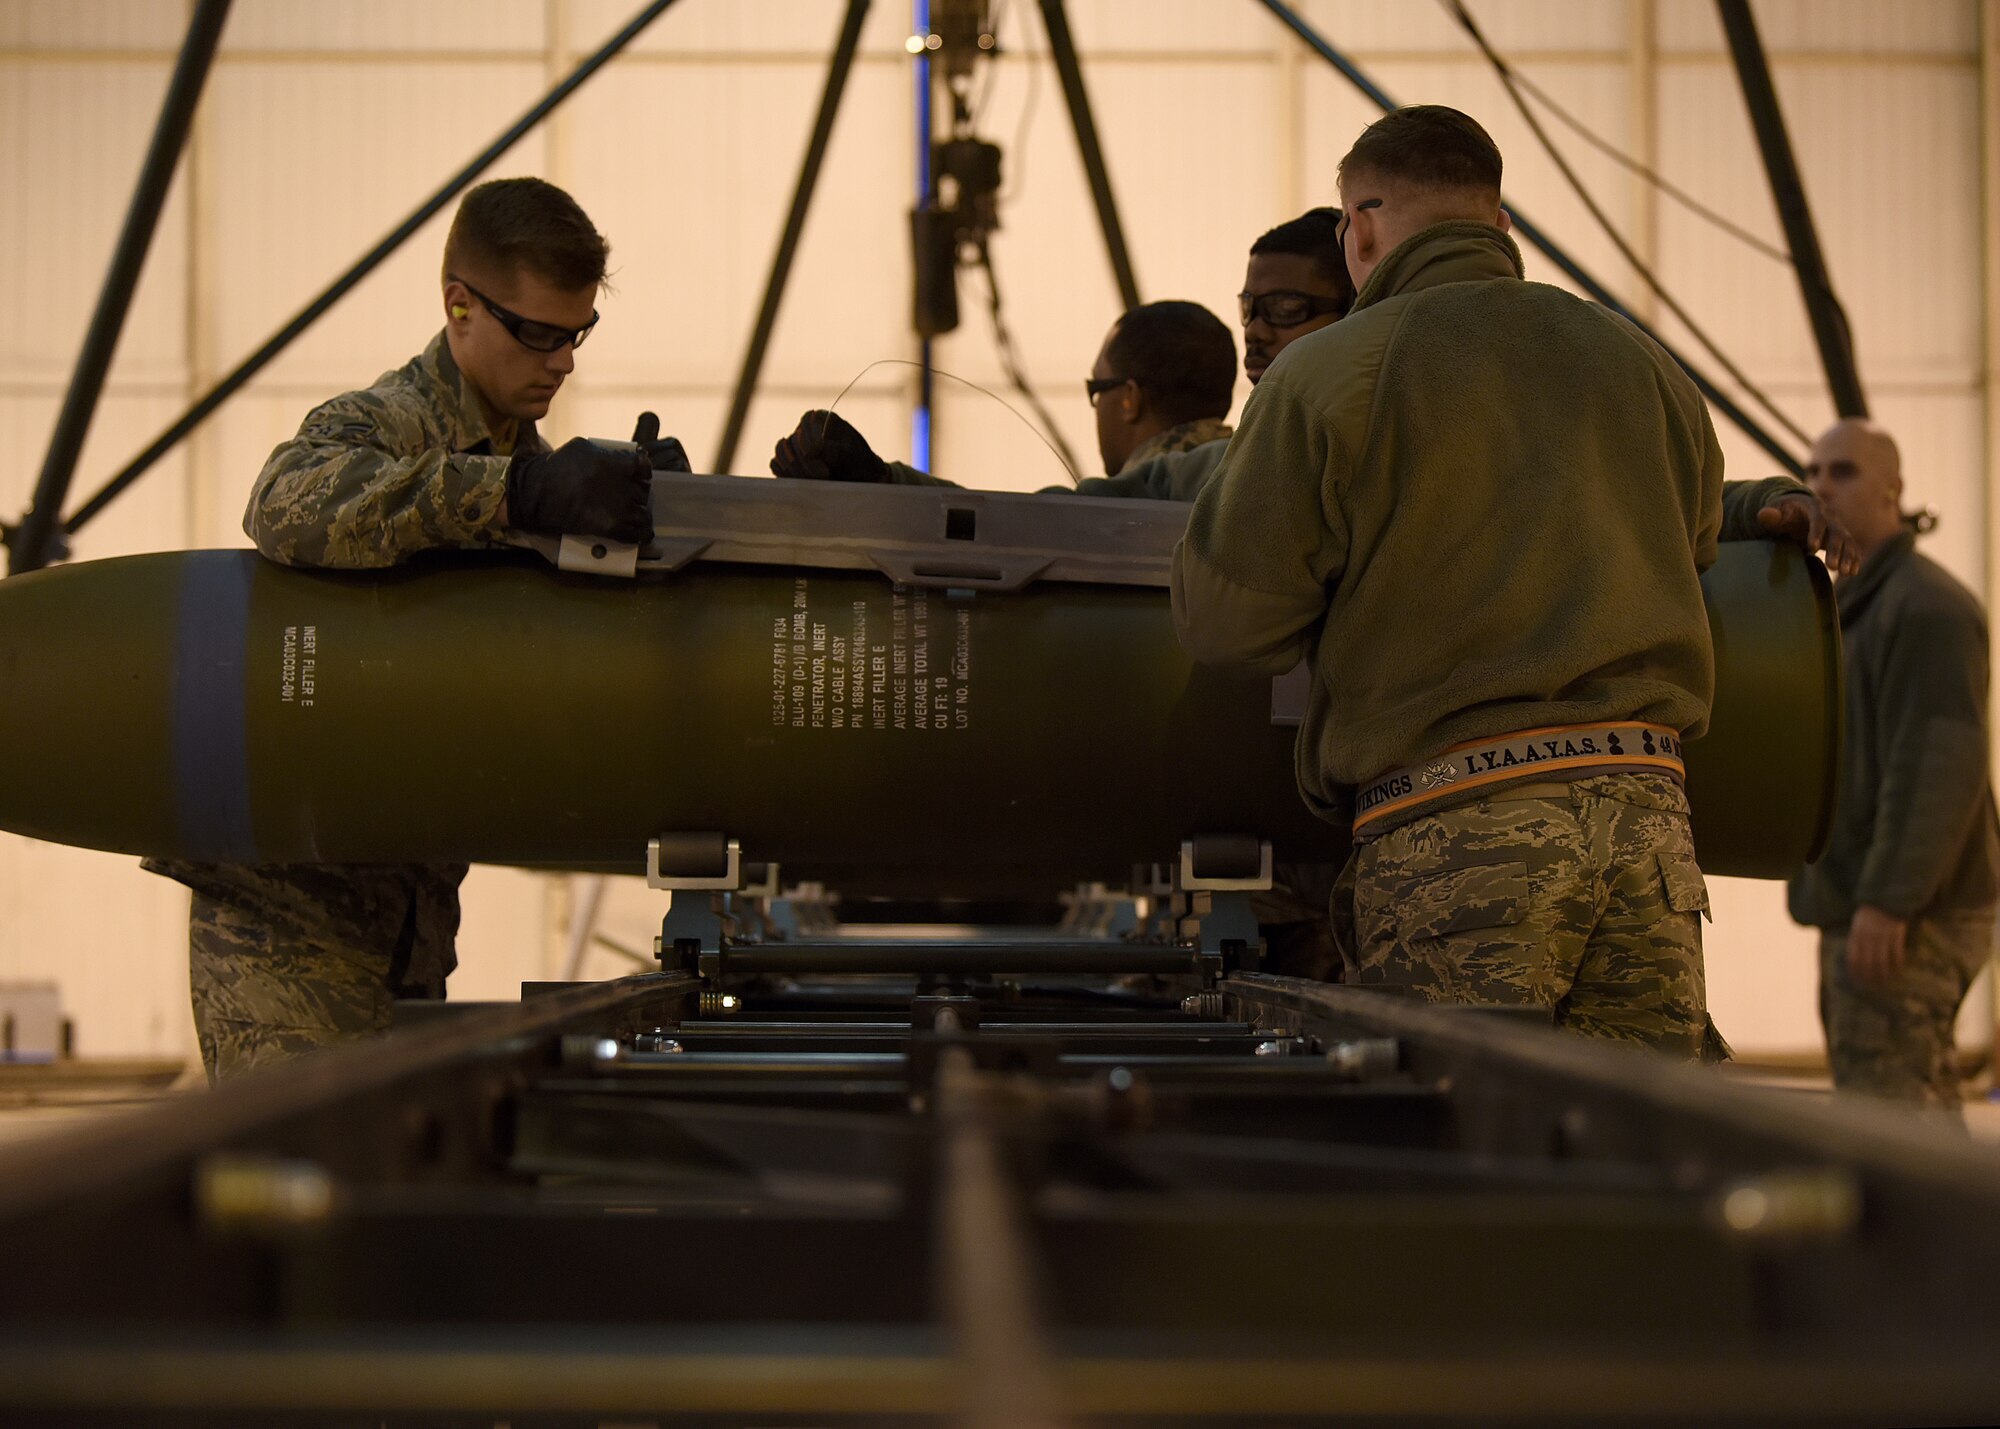 Airmen from the 48th Munitions Squadron attach the hardback assembly of an inert ordnance at Royal Air Force Lakenheath, England, Jan. 23, 2019. The Airmen were training for the Air Force Combat Operations Competition, an annual munitions-building competition designed to test participants on all of the aspects used by ammo personnel in wartime operations. (U.S. Air Force photo by Airman 1st Class Madeline Herzog)